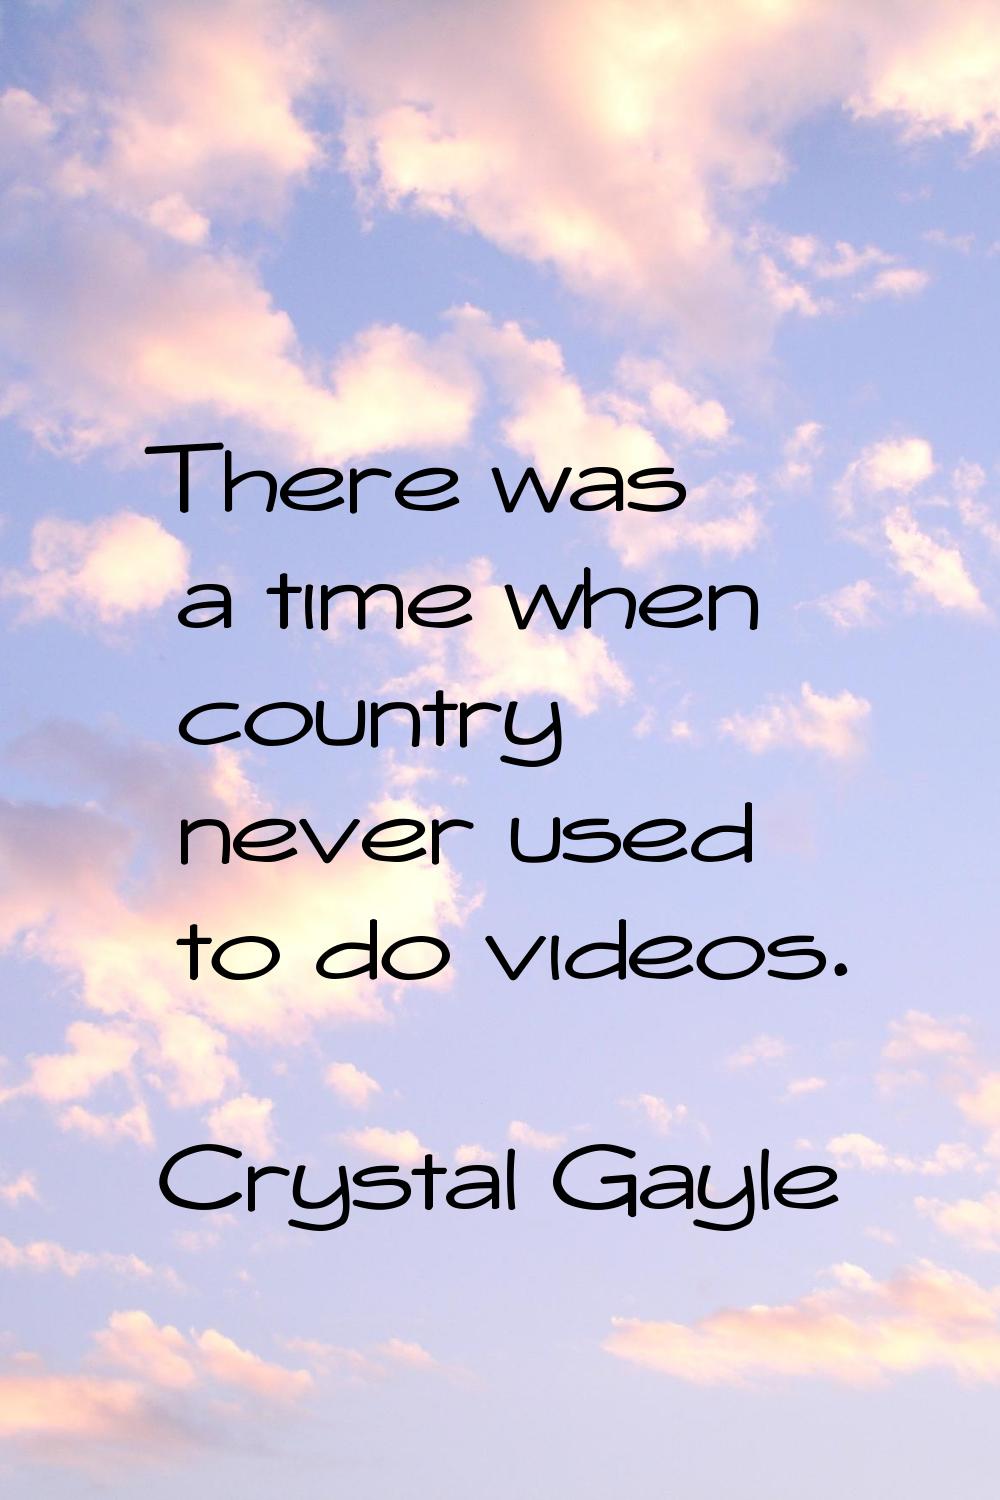 There was a time when country never used to do videos.